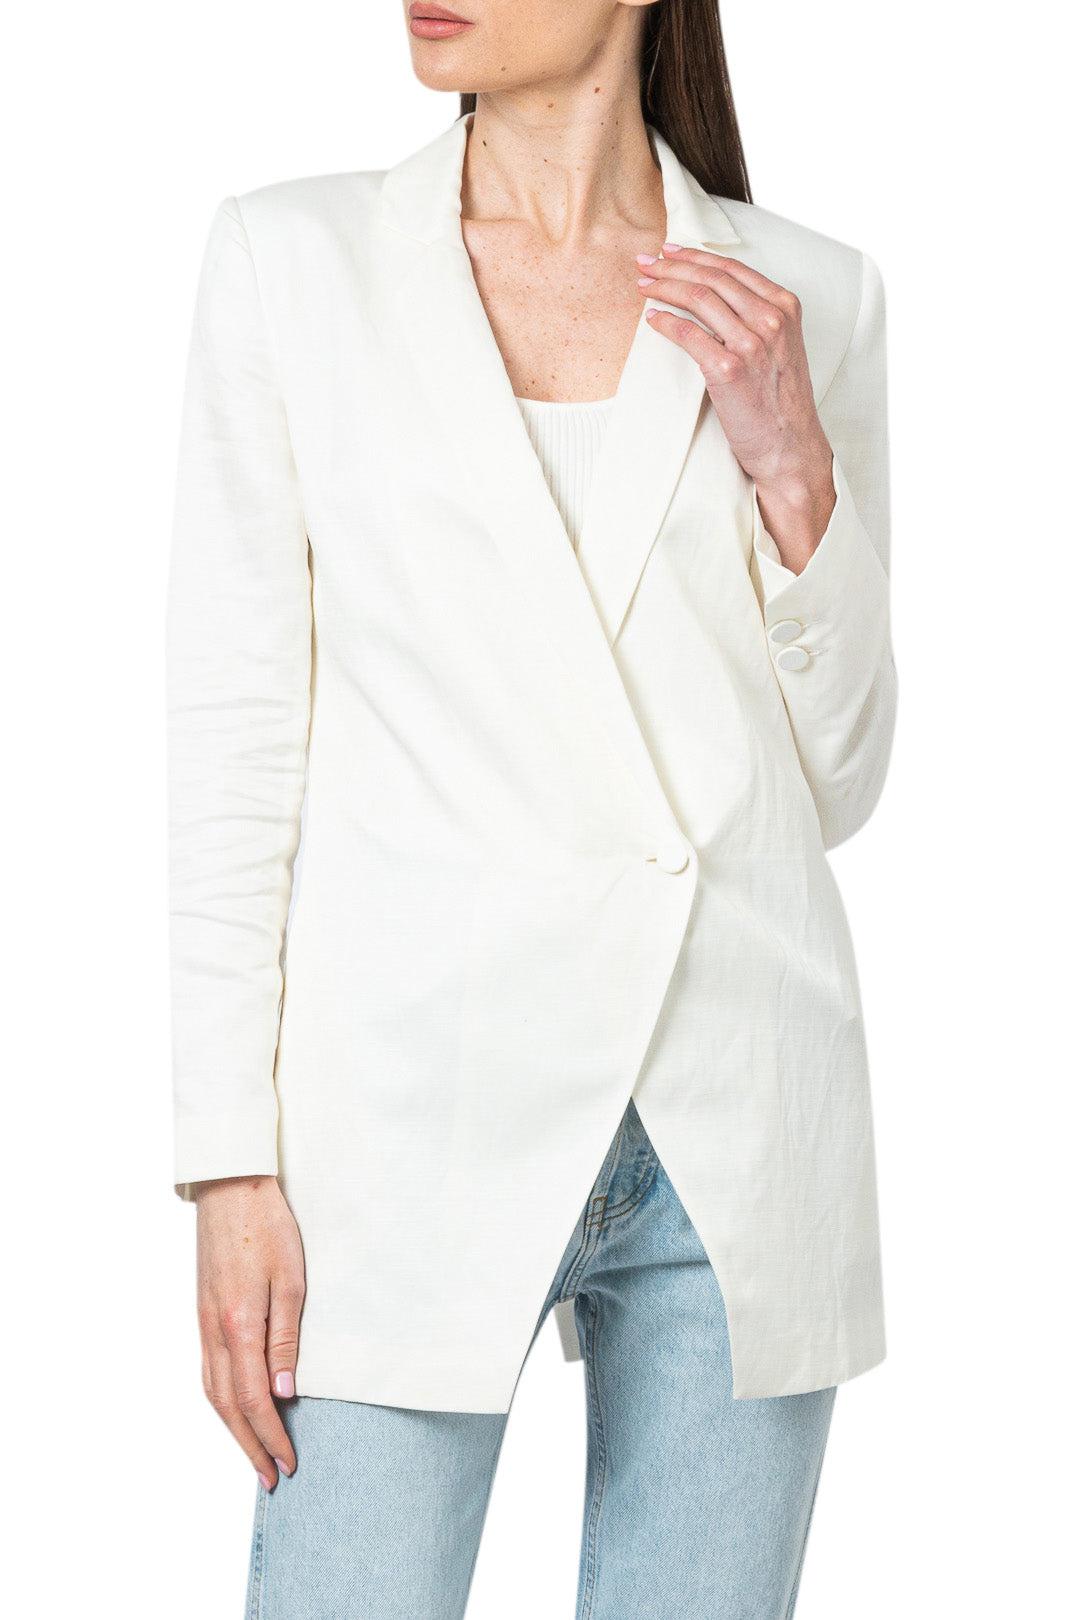 Sir The Label-Tailored blazer jacket-dgallerystore